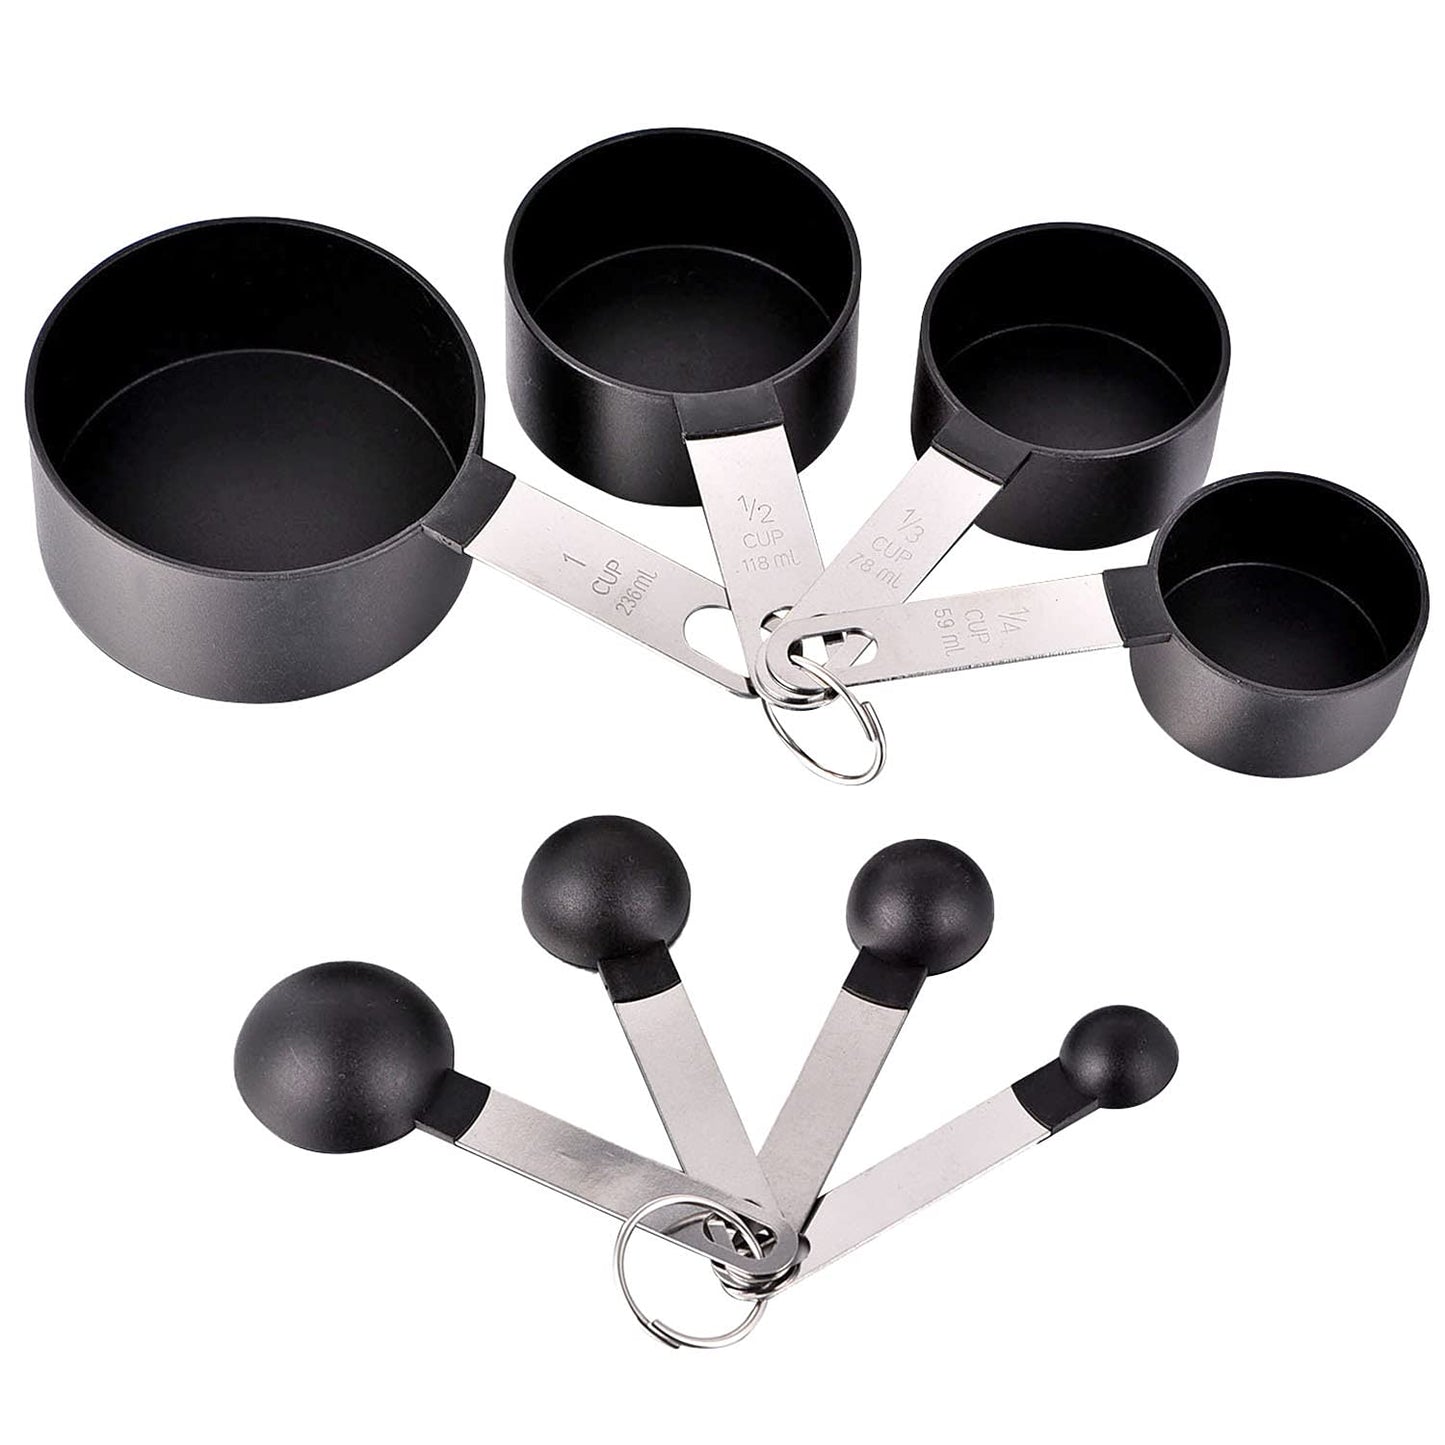 SYNGAR Measuring Cups and Spoons Set, Nesting Measure Cups with Stainless Steel Handle, Home Essentials Measuring 4 Cups and 4 Spoons for Baking, Cooking, Teaspoons Set, Black